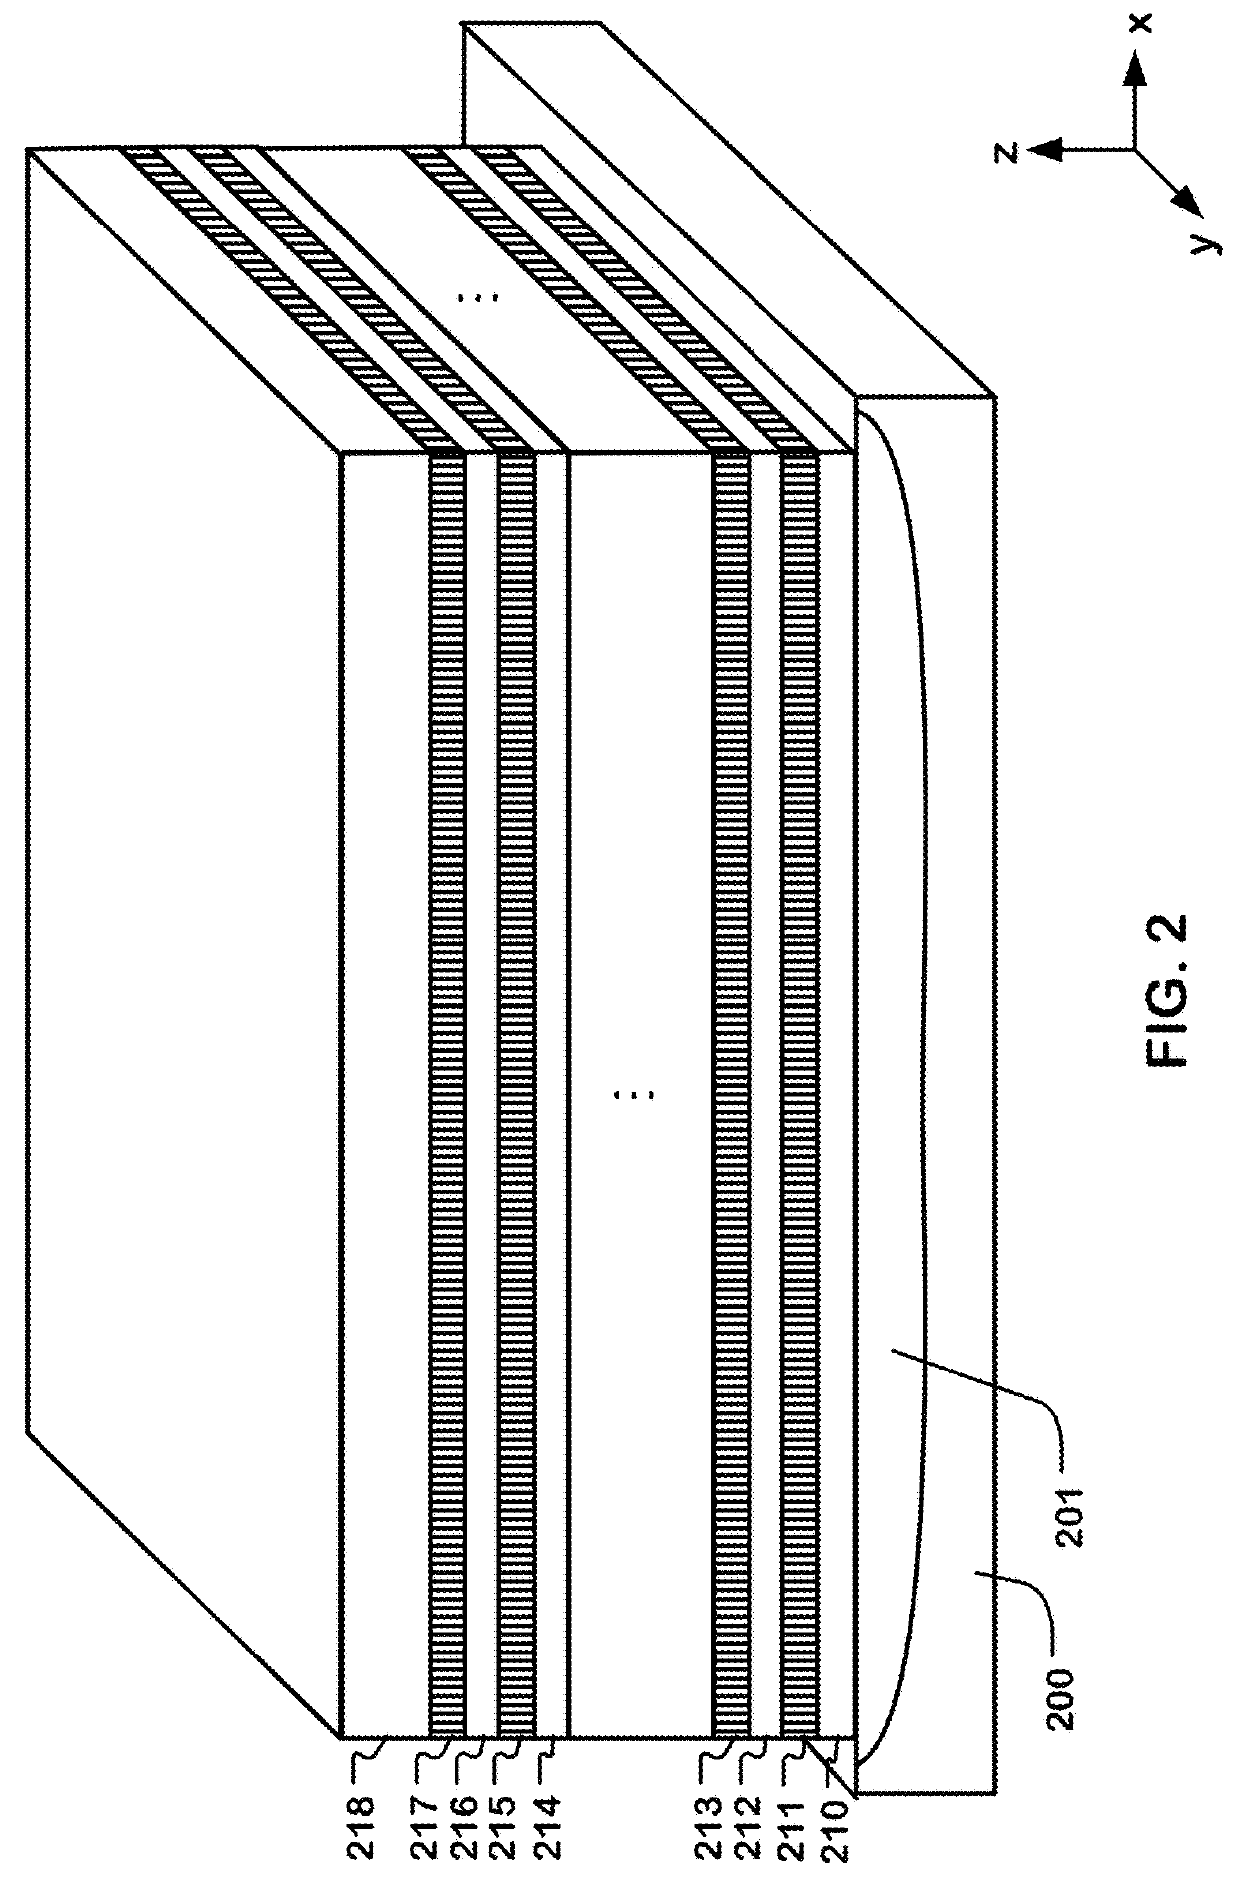 3D memory device with layered conductors